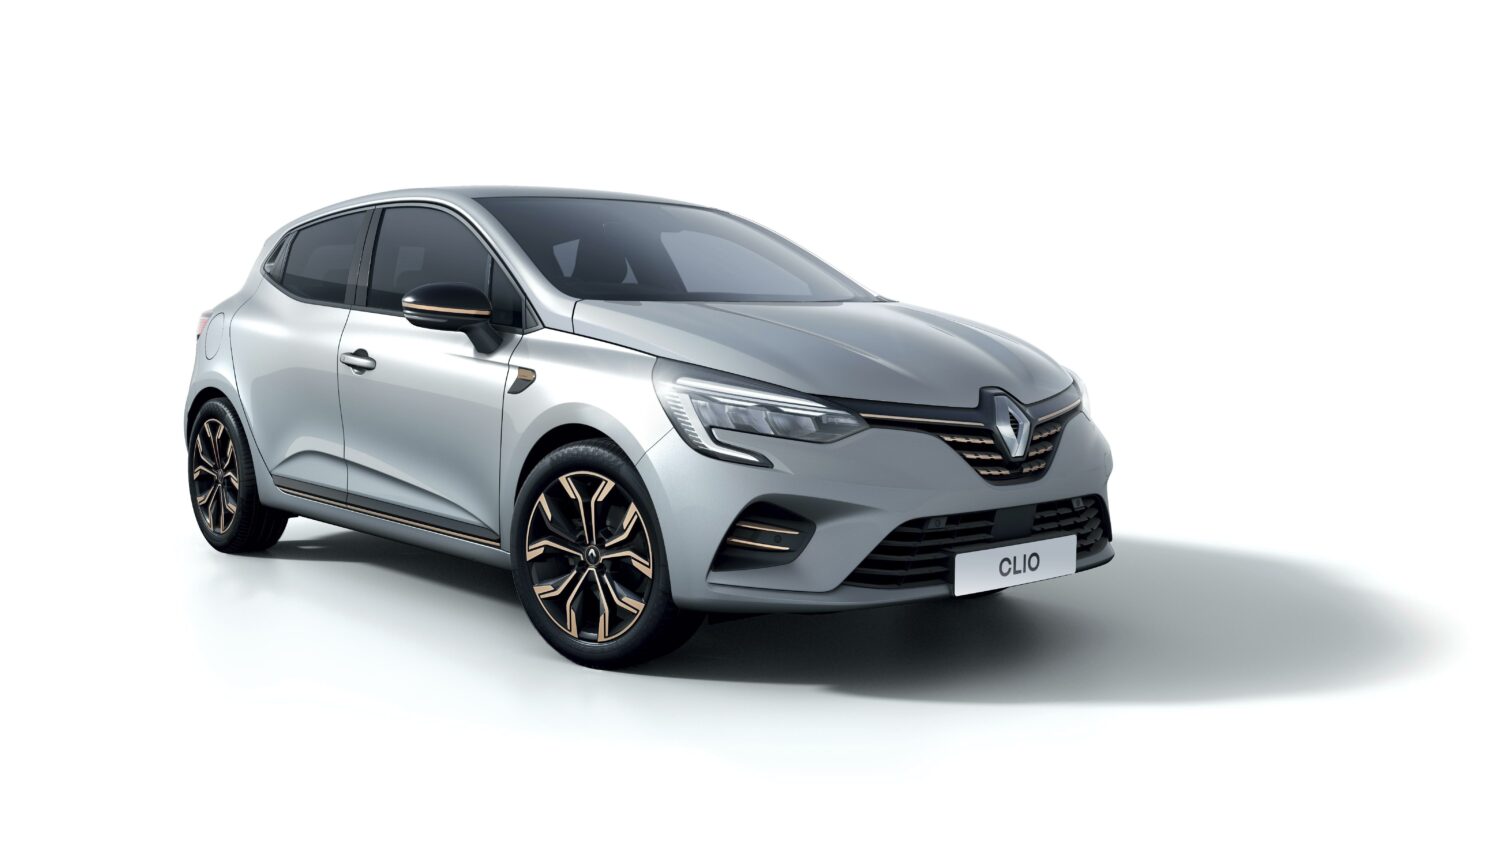 2021 - Renault Clio Lutecia Limited Series - Right-hand drive